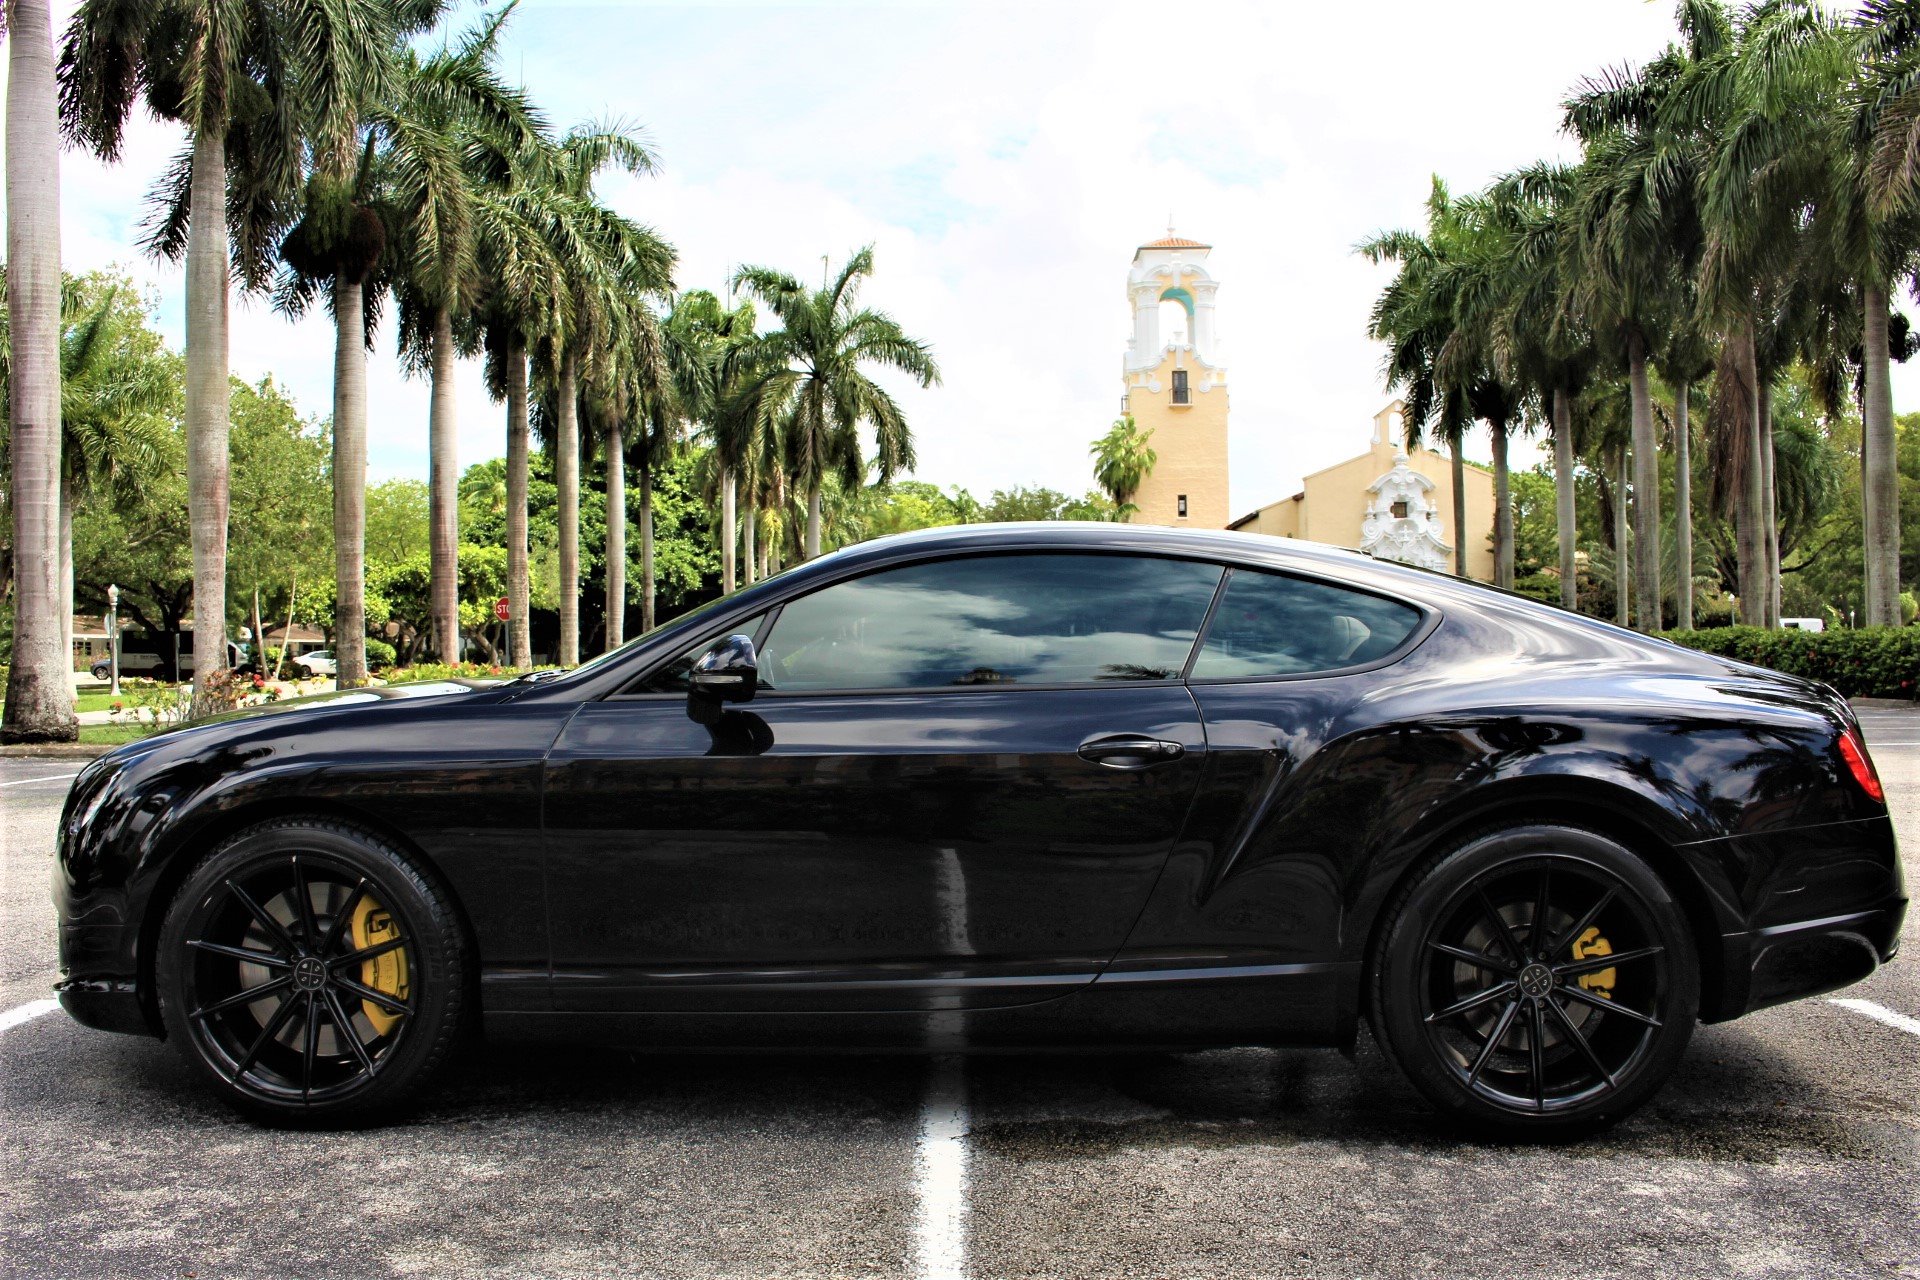 Used 2012 Bentley Continental GT for sale Sold at The Gables Sports Cars in Miami FL 33146 2